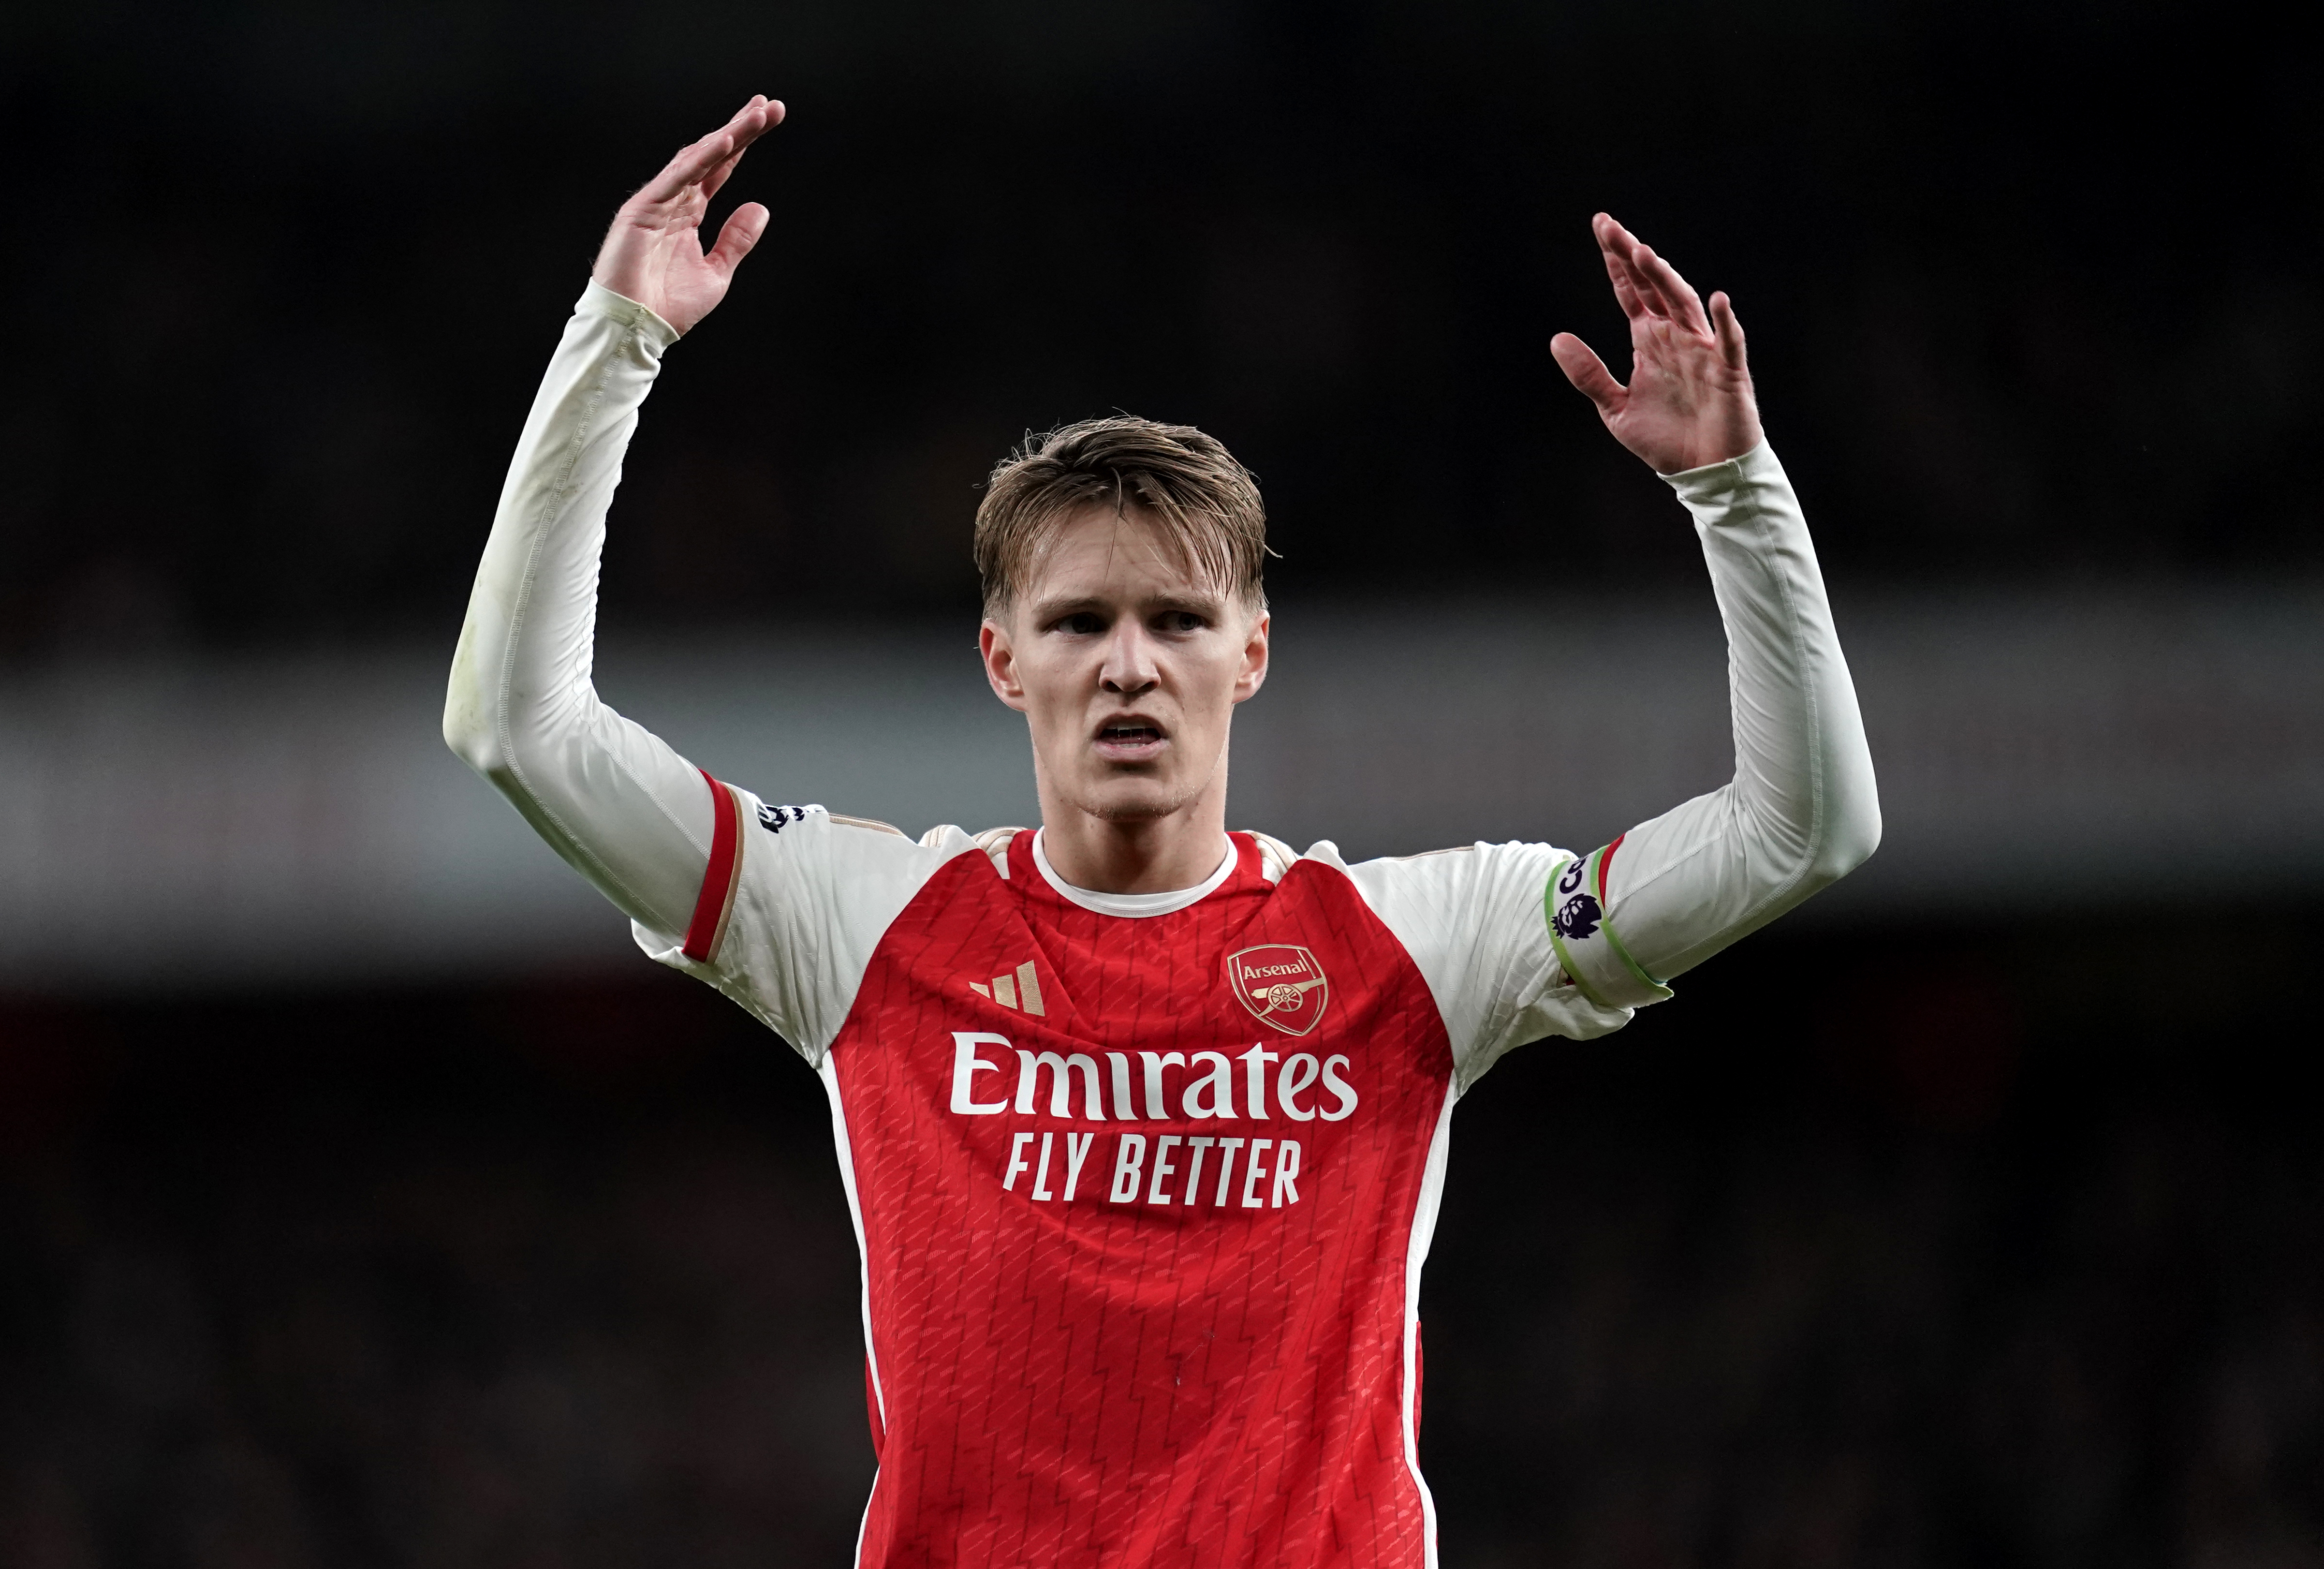 Martin Odegaard conceded Arsenal had not been clinical enough to beat West Ham